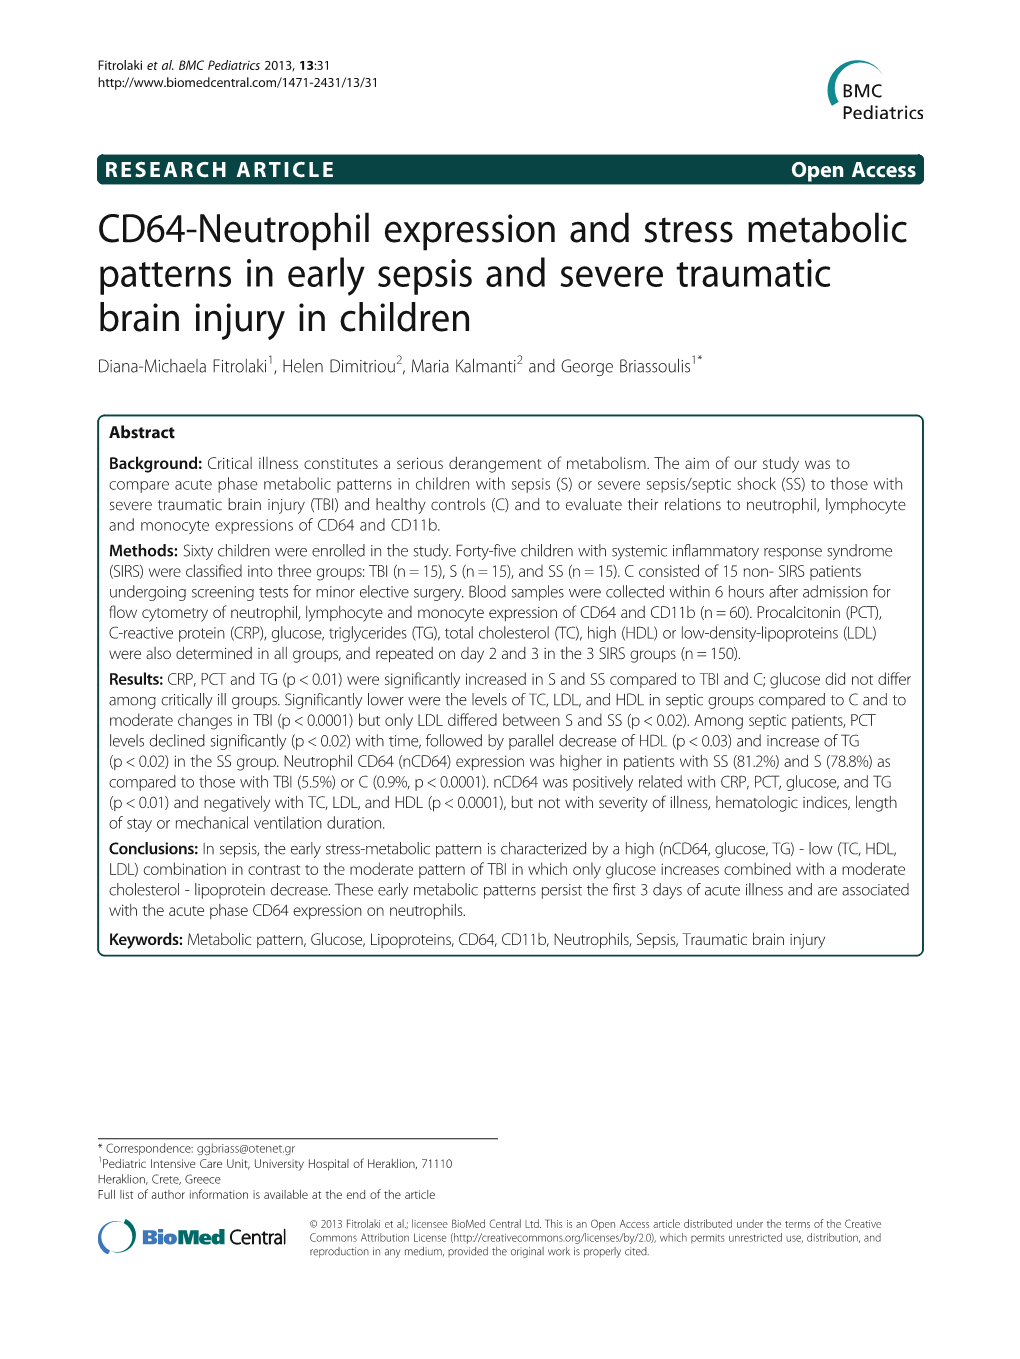 CD64-Neutrophil Expression and Stress Metabolic Patterns in Early